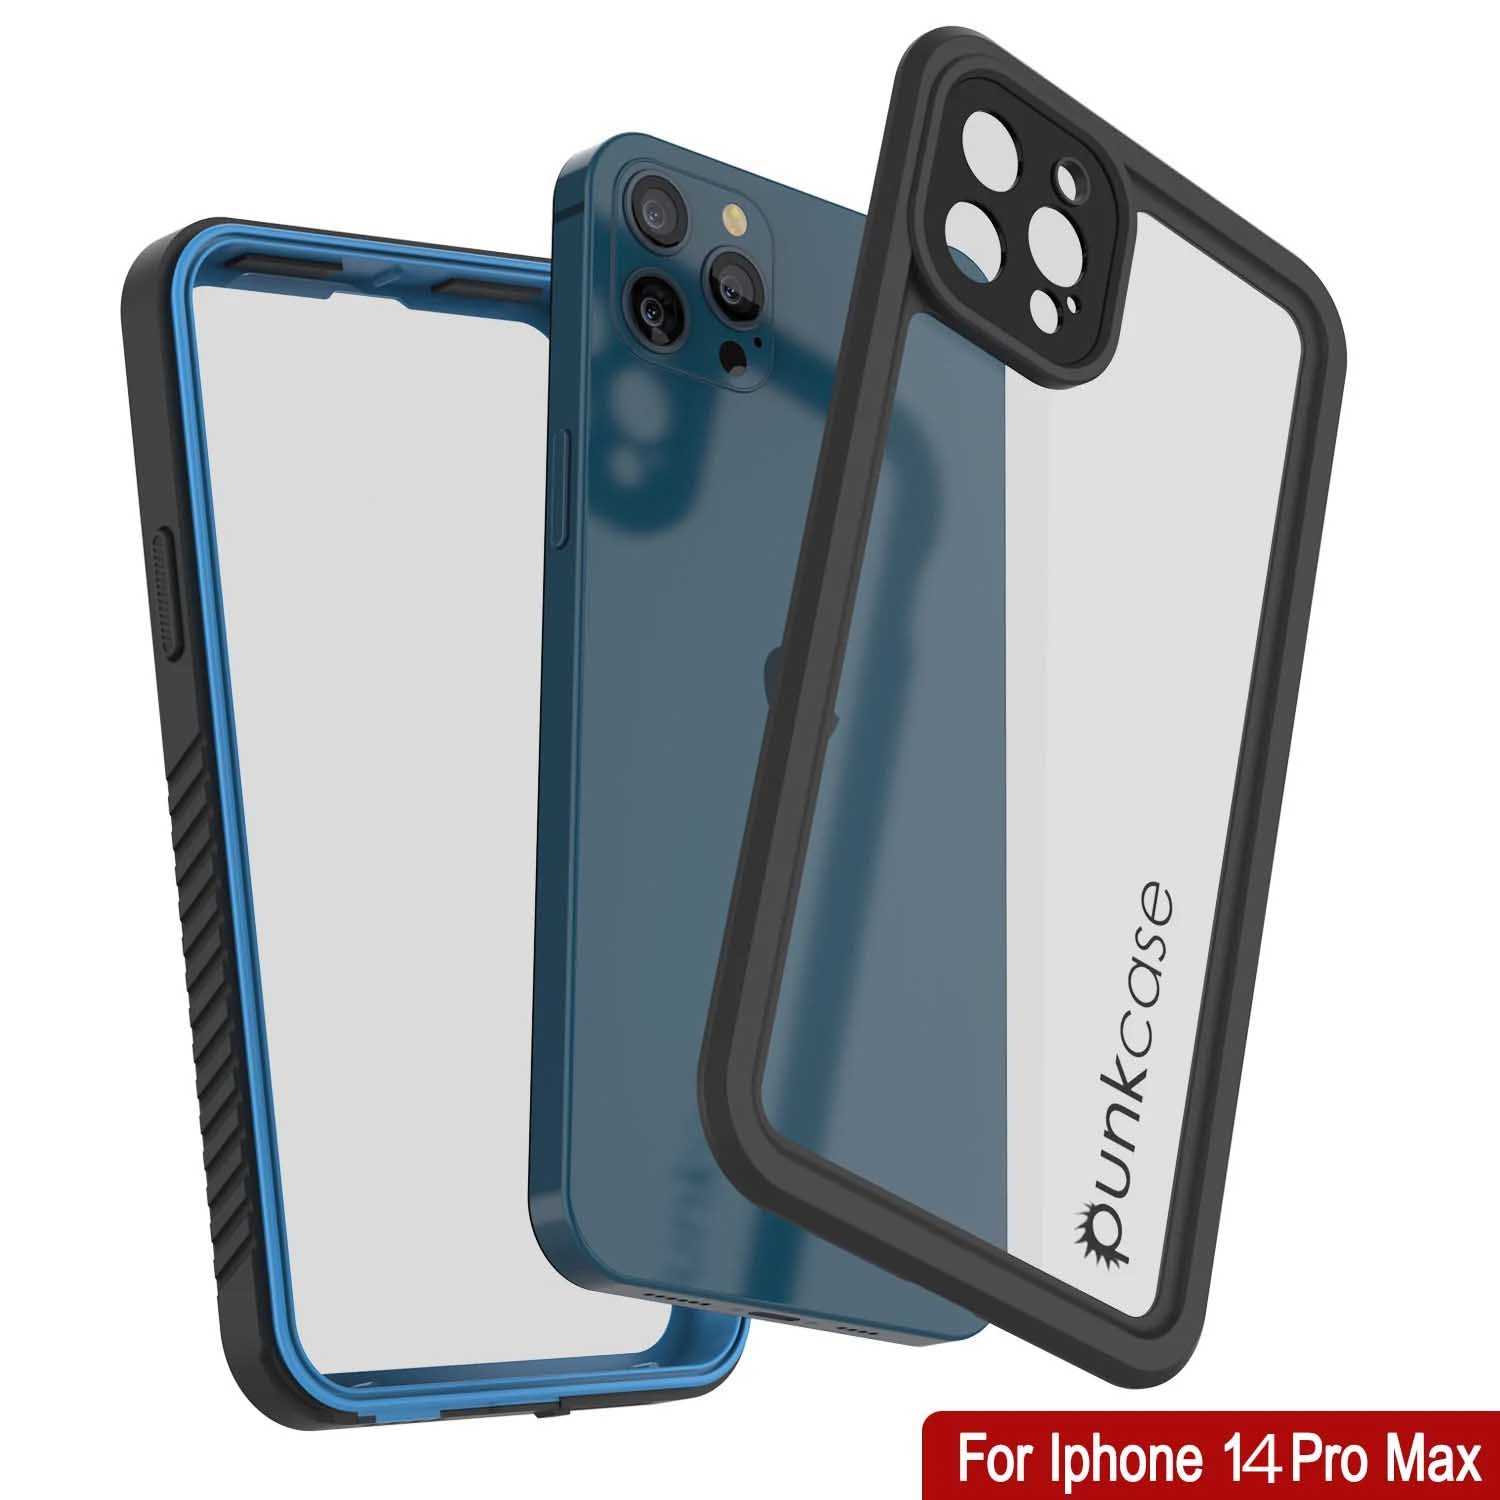 Products iPhone 14 Pro Max Waterproof Case, Punkcase [Extreme Series] Armor Cover W/ Built In Screen Protector [Light Blue]